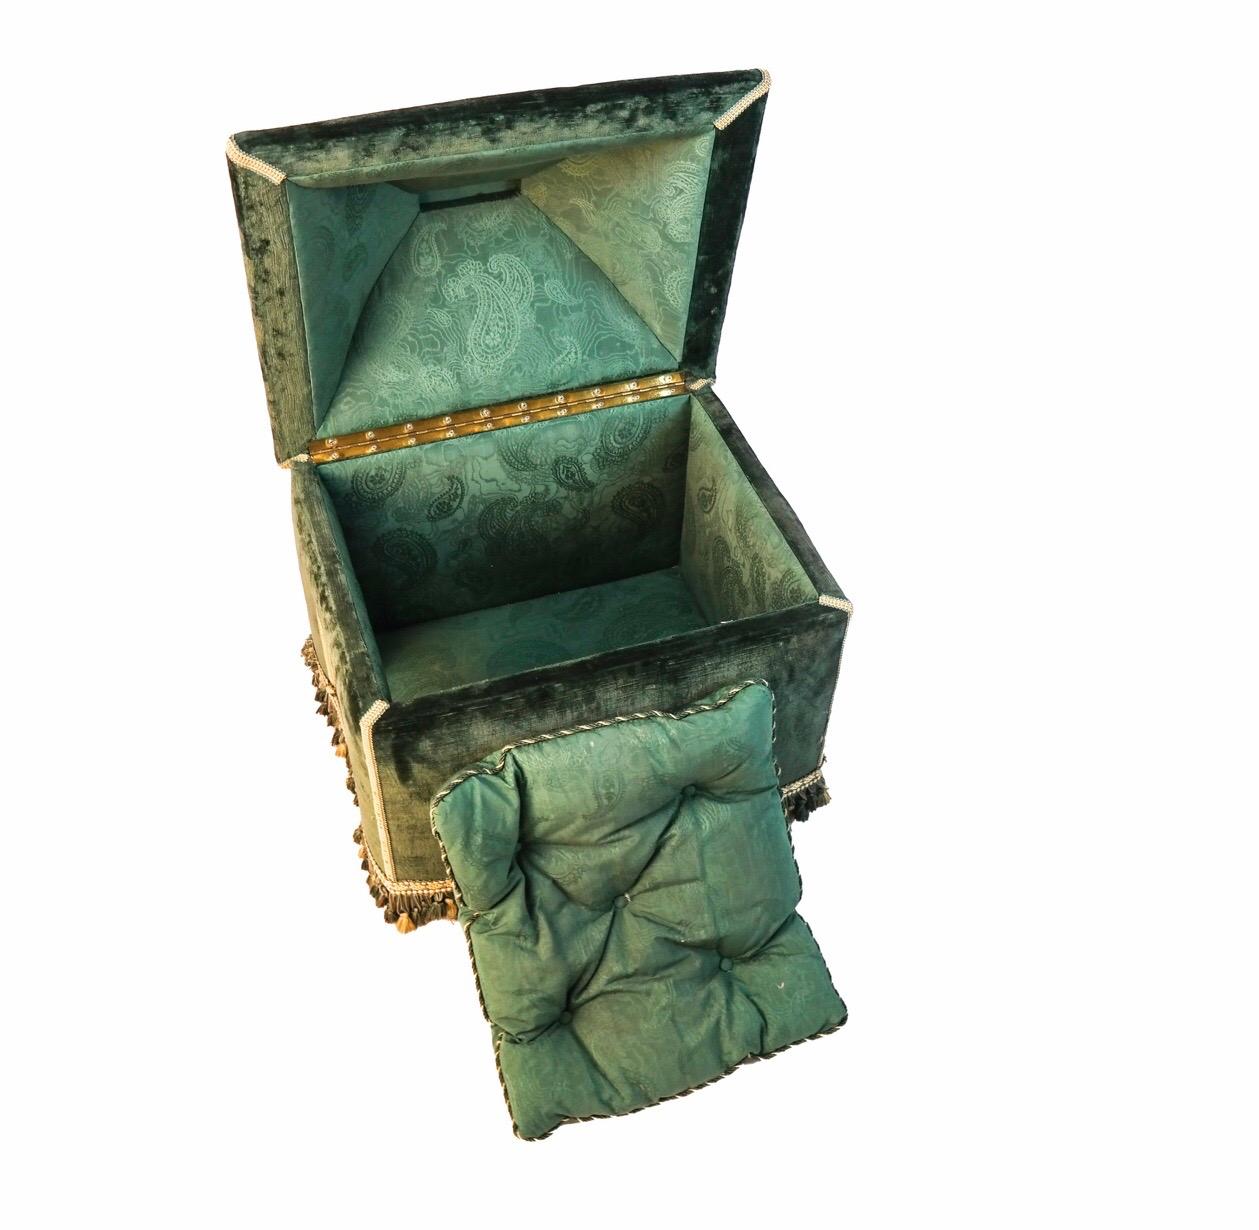 Baroque Revival Baroque Style Green Upholstered Dog House, French, 20th Century For Sale